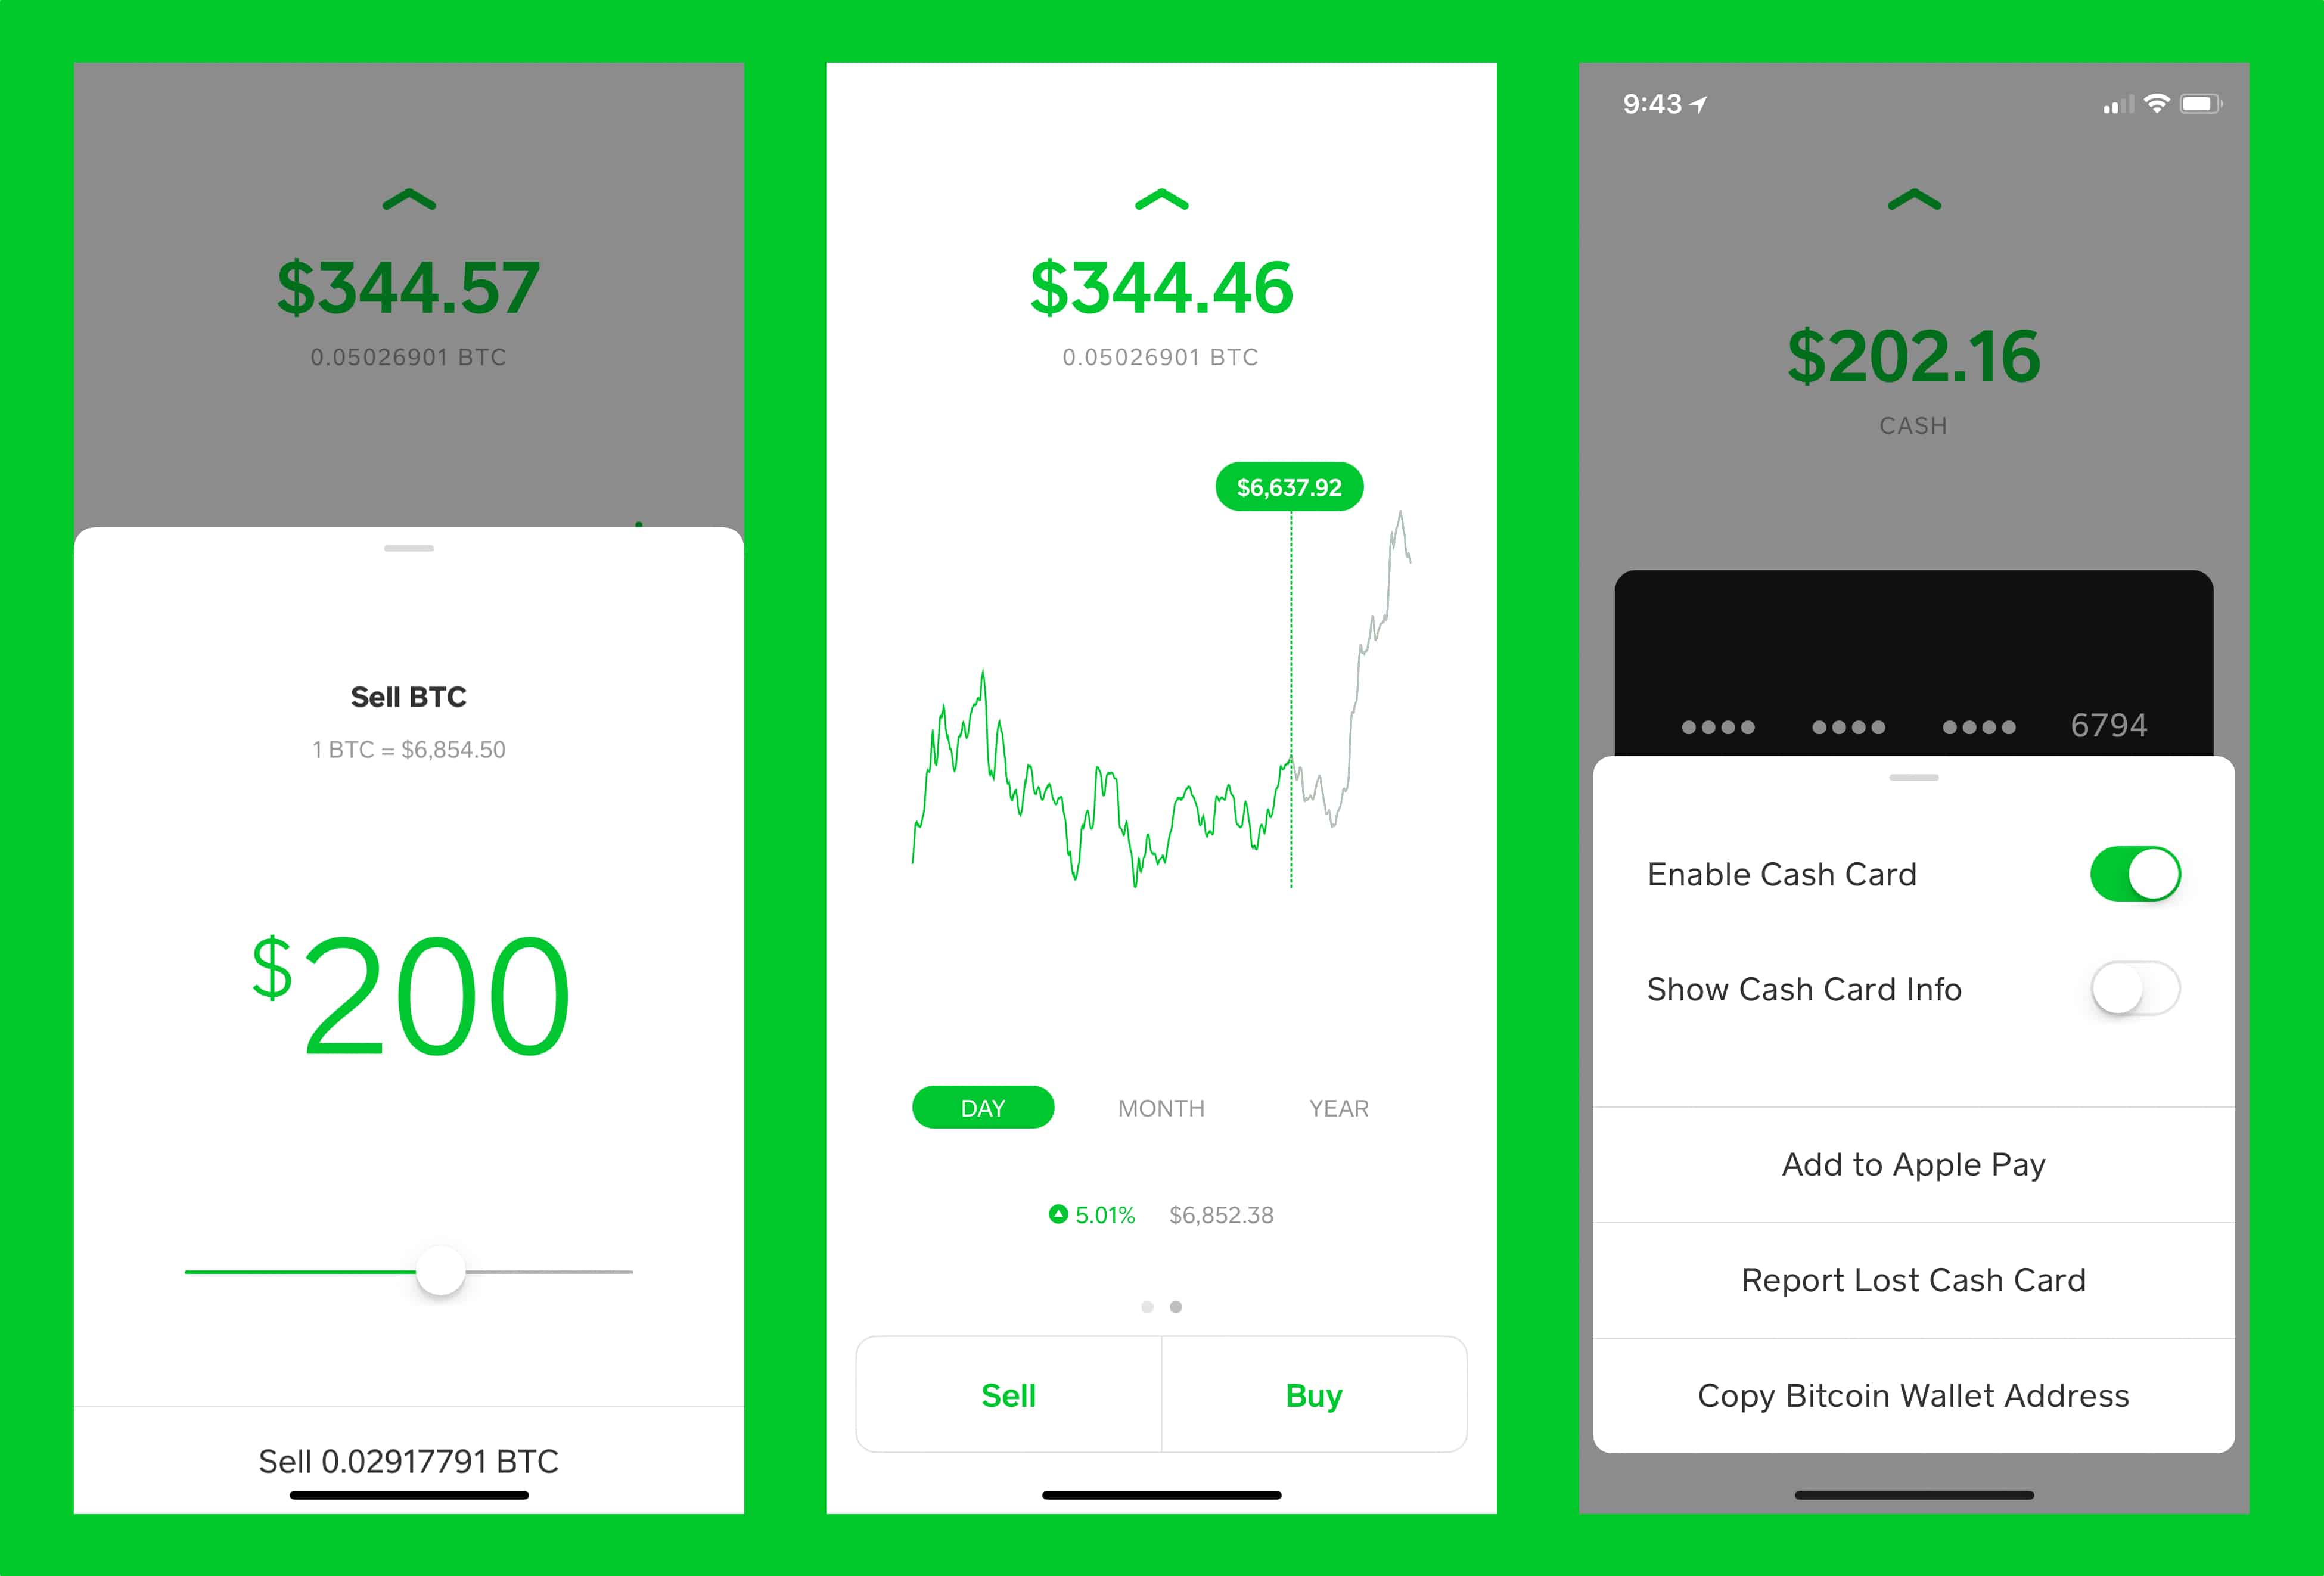 how to add money to bitcoin on cash app